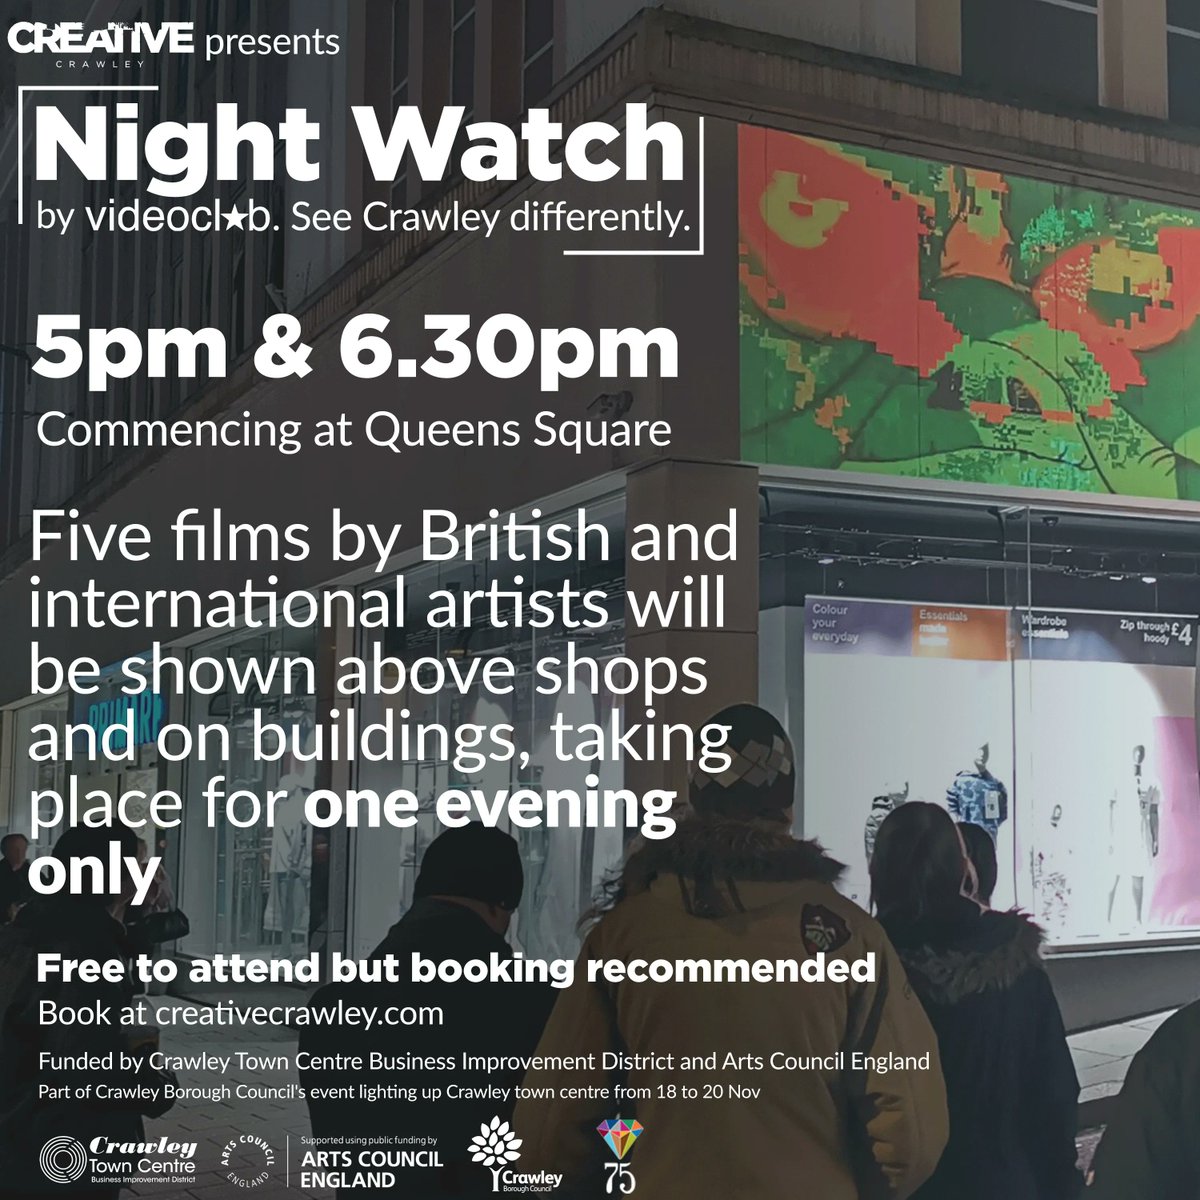 On the 19 November we're partnering with @videoclub_uk to bring the Night Watch film trail to Crawley town centre as part of @crawleybc's Light Up event, running from 18-20 Nov Touring at 5pm & 6.30pm Book FREE: buff.ly/3DAtLSa Funded by @crawleytcbid & @ace_southeast